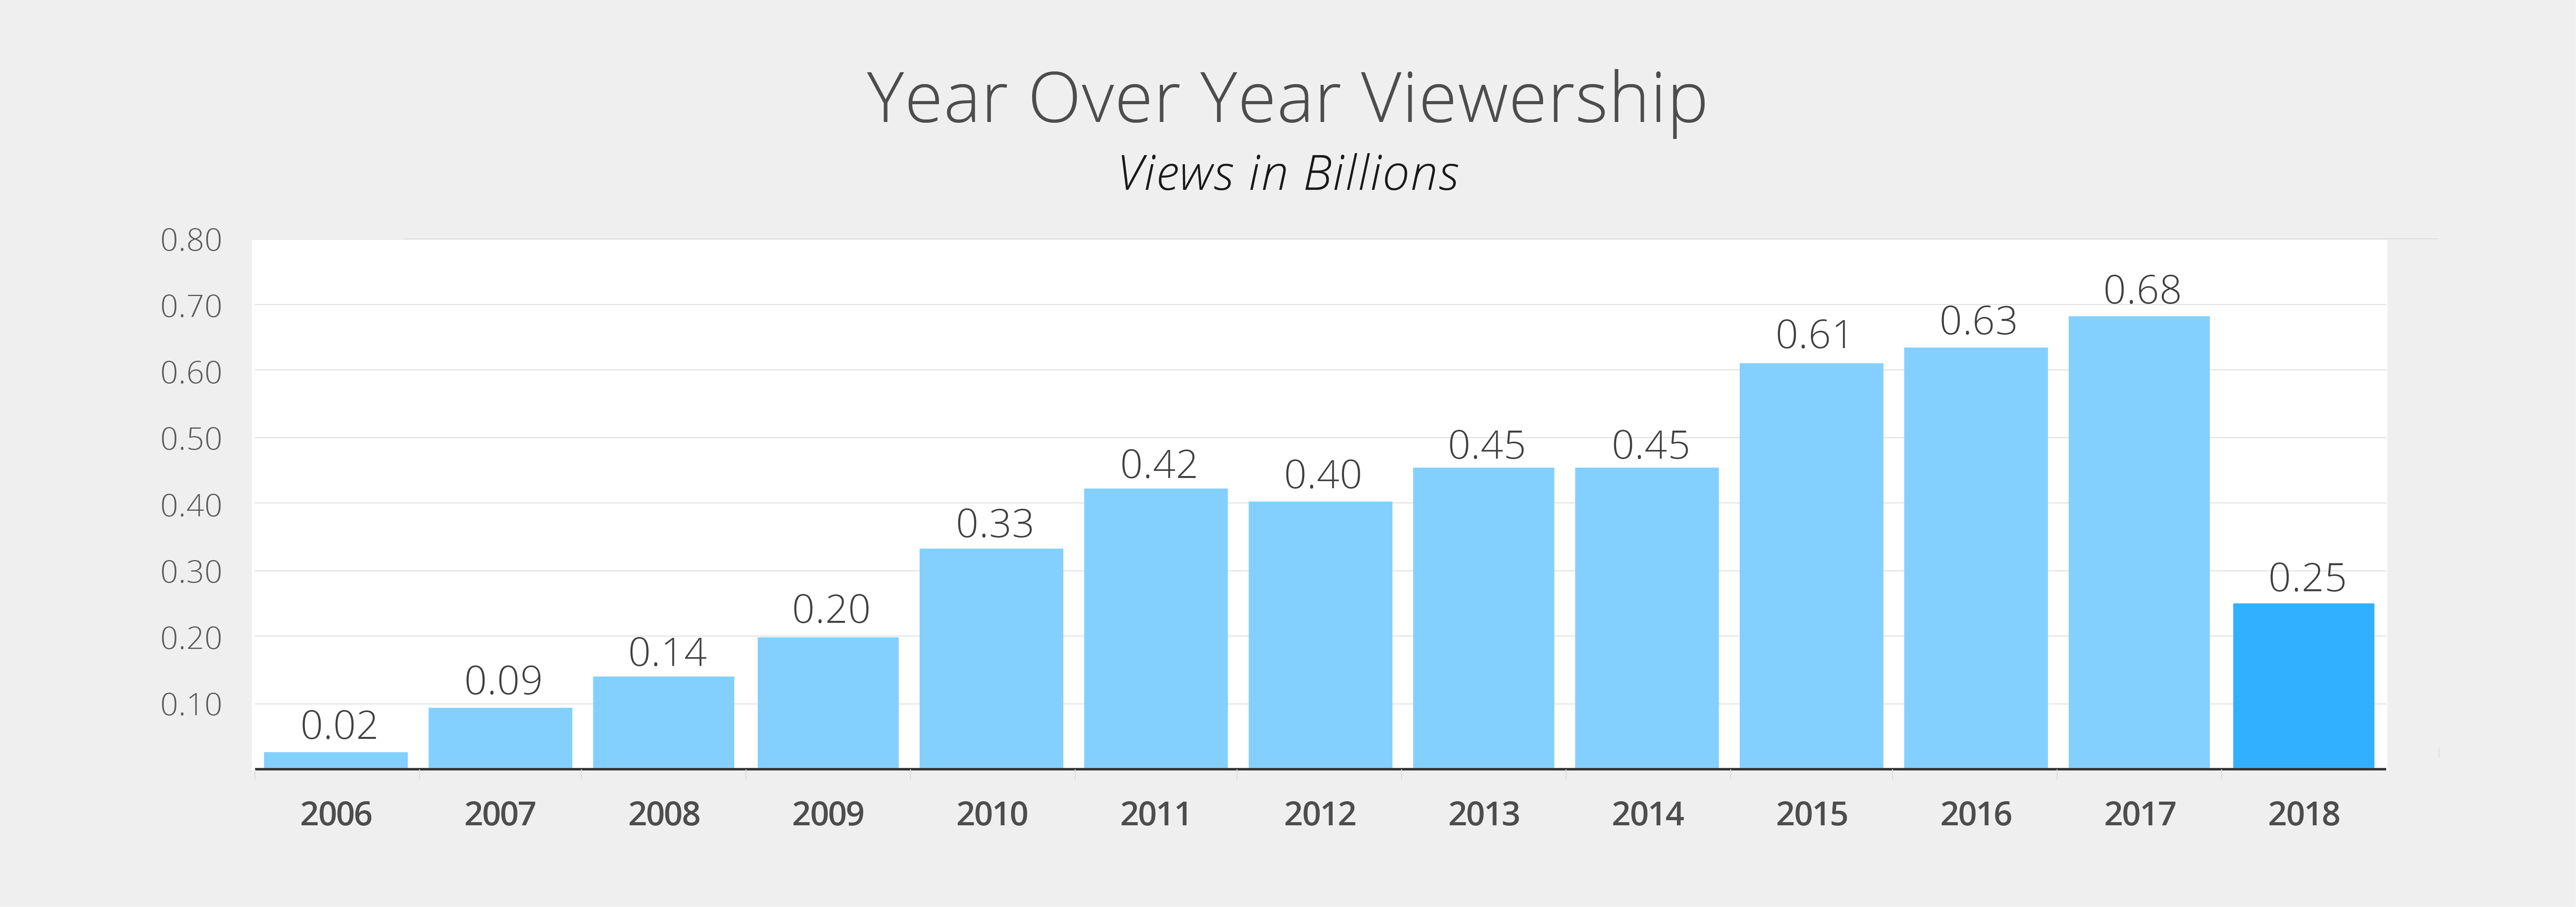 Year over year viewership of back-to-school video content